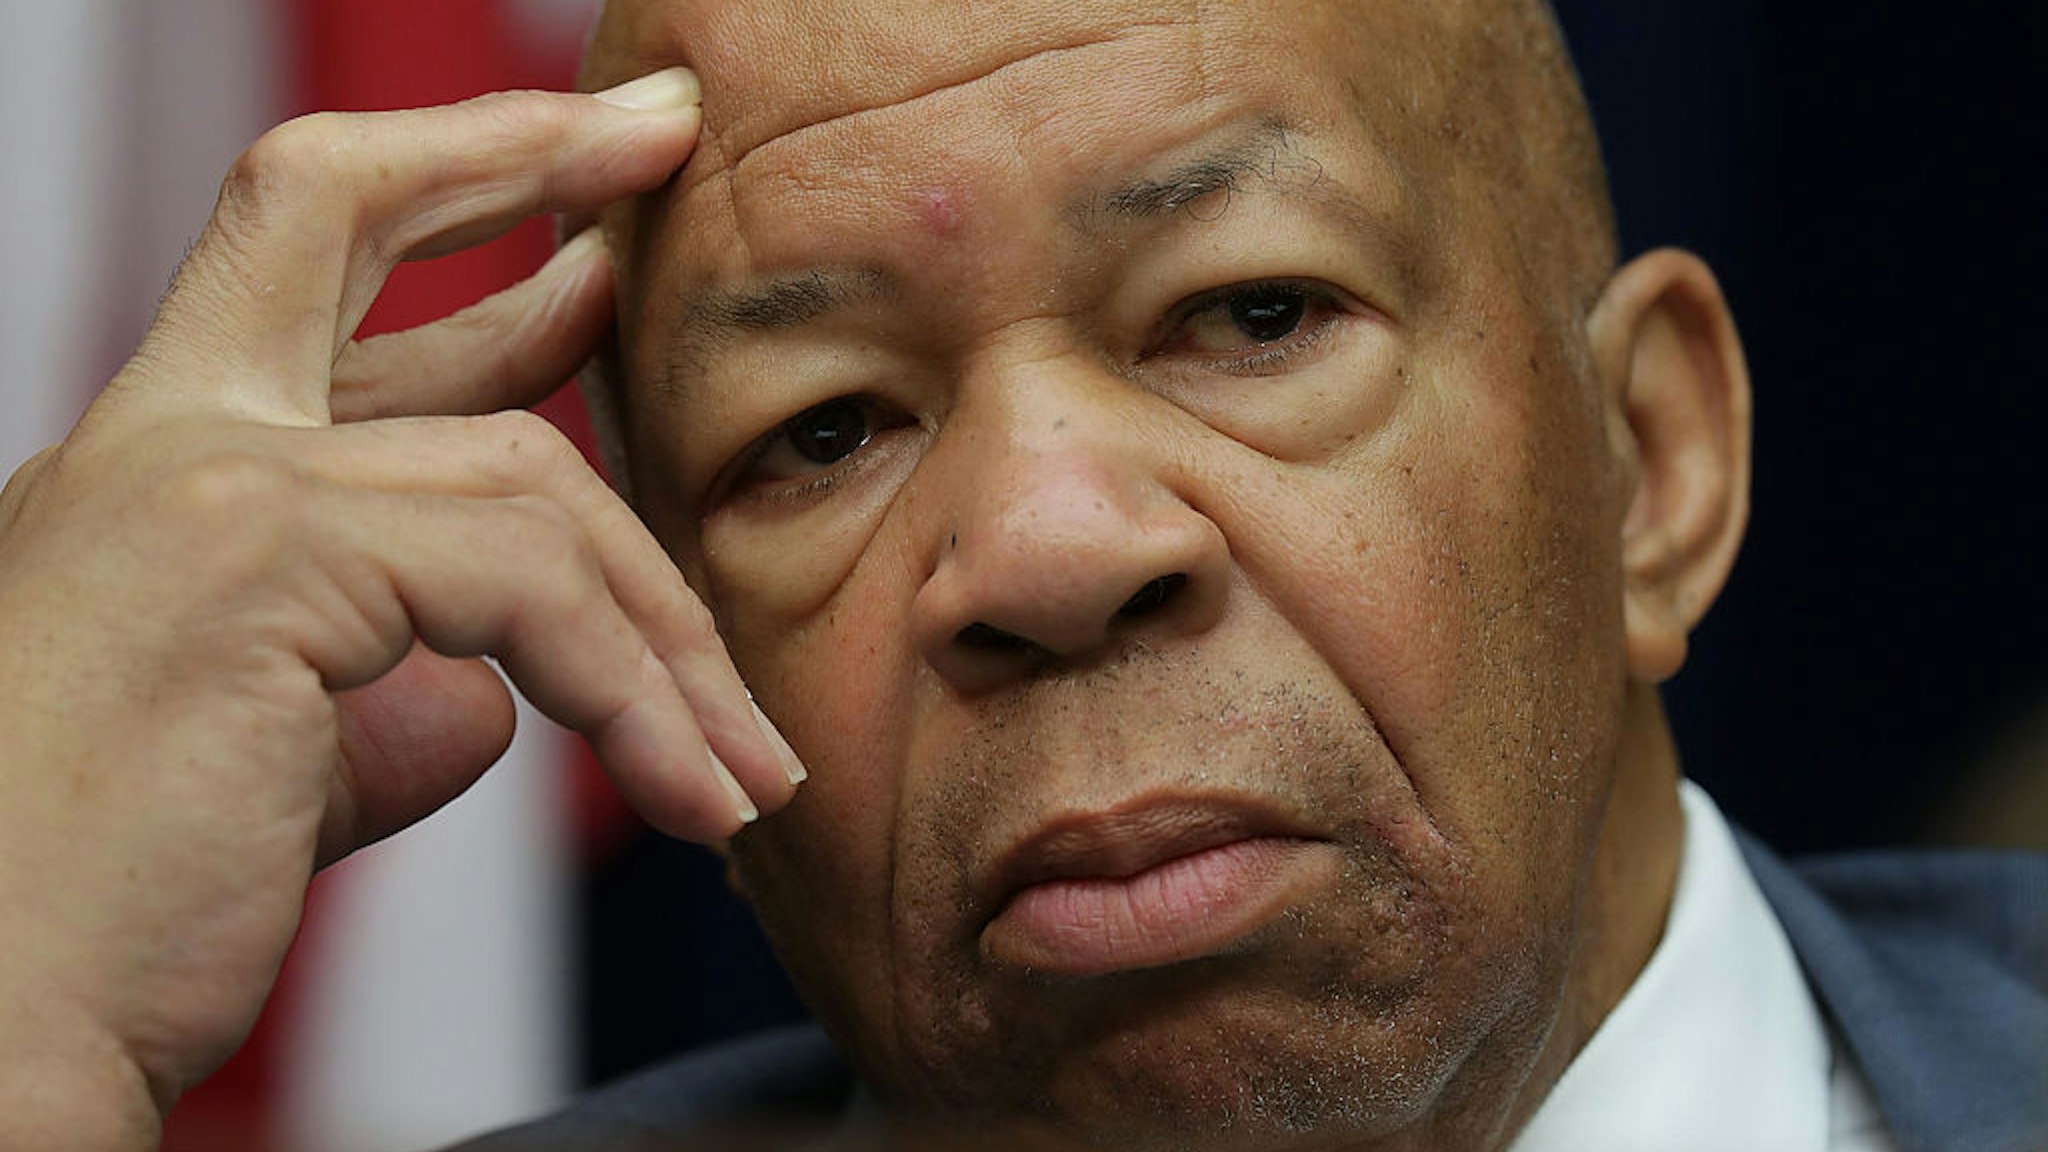 WASHINGTON, DC - SEPTEMBER 13: Ranking member Rep. Elijah Cummings (D-MD) listens during a hearing on "Examining Preservation of State Department Federal Records" before the House Oversight and Government Reform Committee September 13, 2016 on Capitol Hill in Washington, DC. Bill Thornton and Paul Combetta of Platte River Network invoked their right under the Fifth Amendment not to answer questions, and Bryan Pagliano, a former IT advisor for the State Department did not show up to testify.